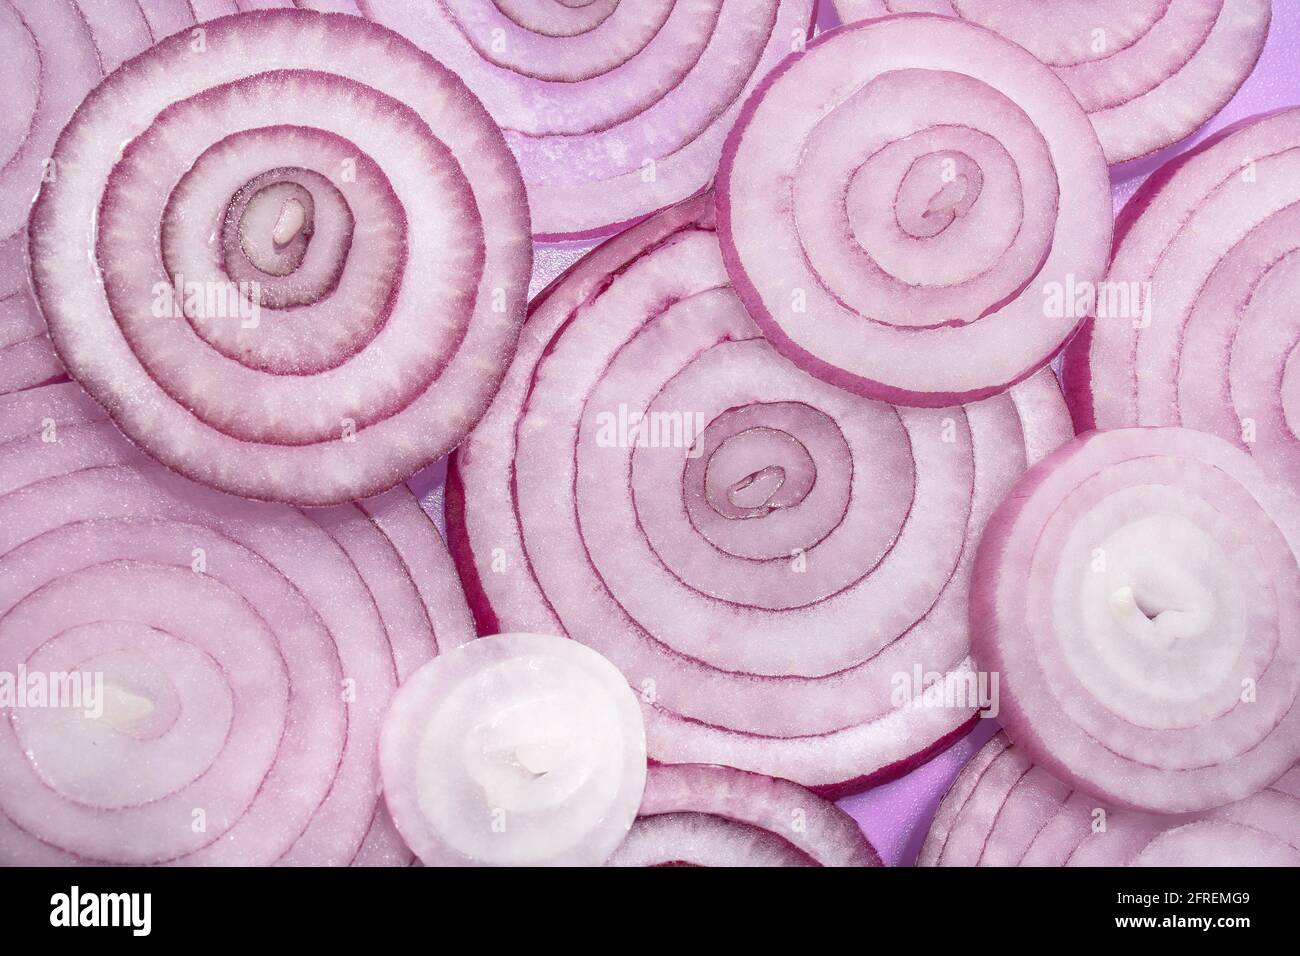 Red onion rings, close up of sliced red onion Stock Photo